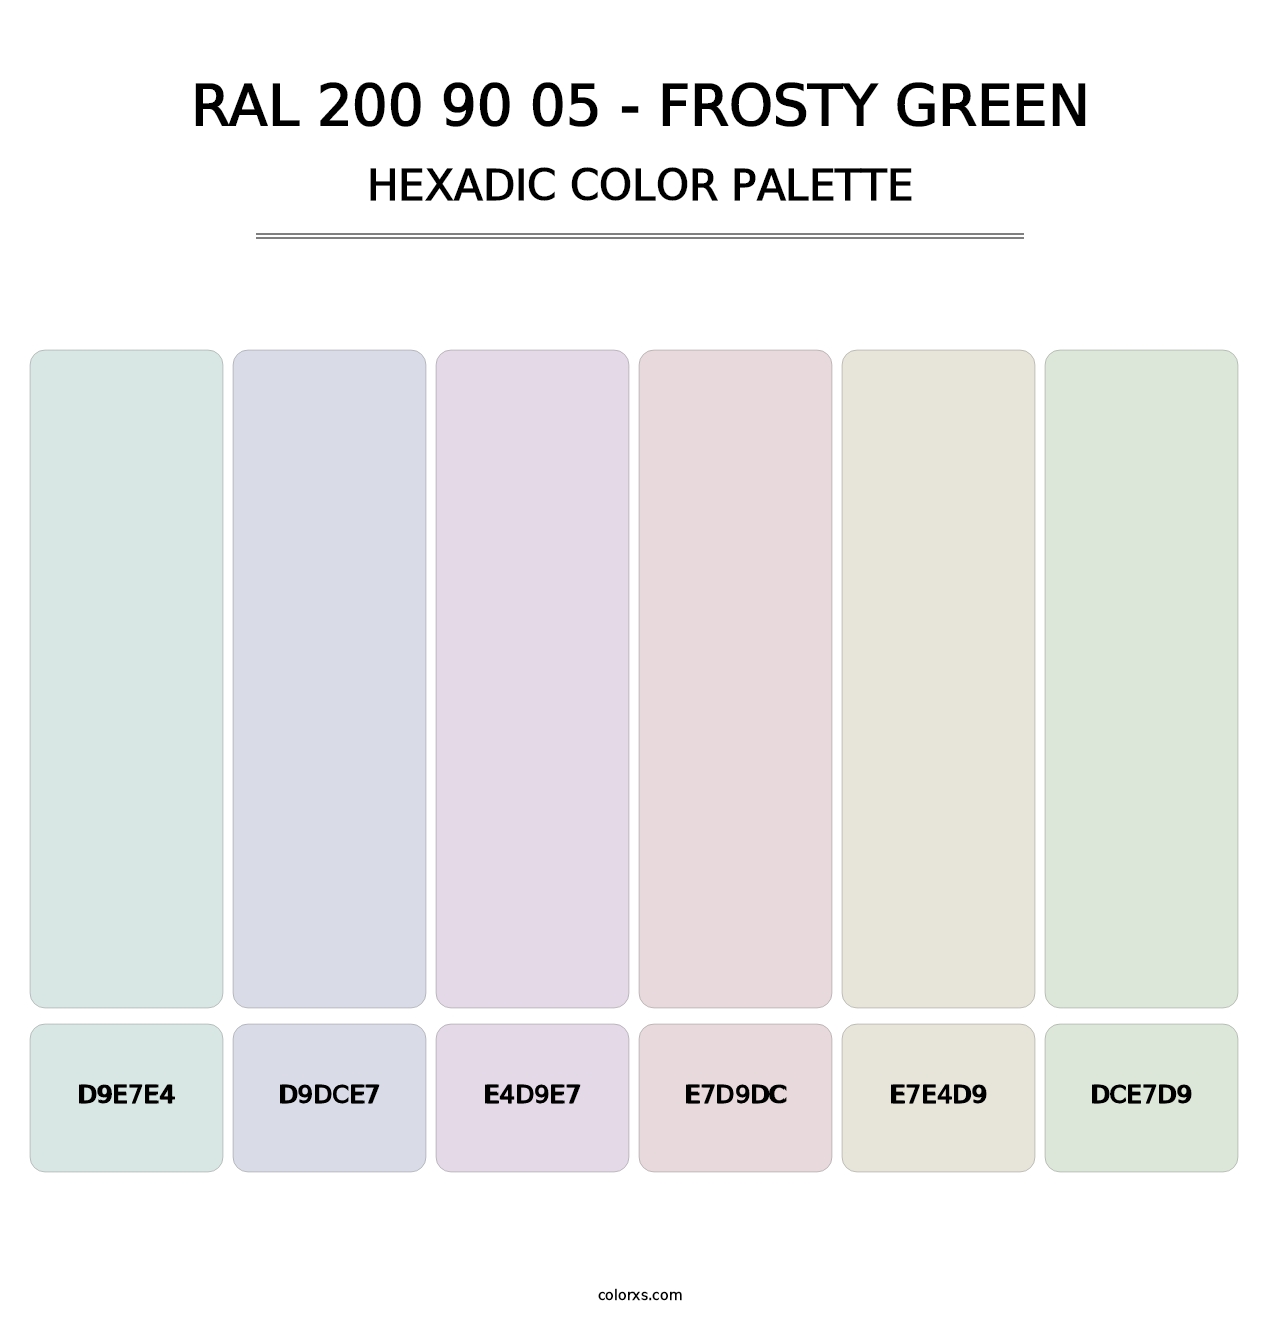 RAL 200 90 05 - Frosty Green - Hexadic Color Palette